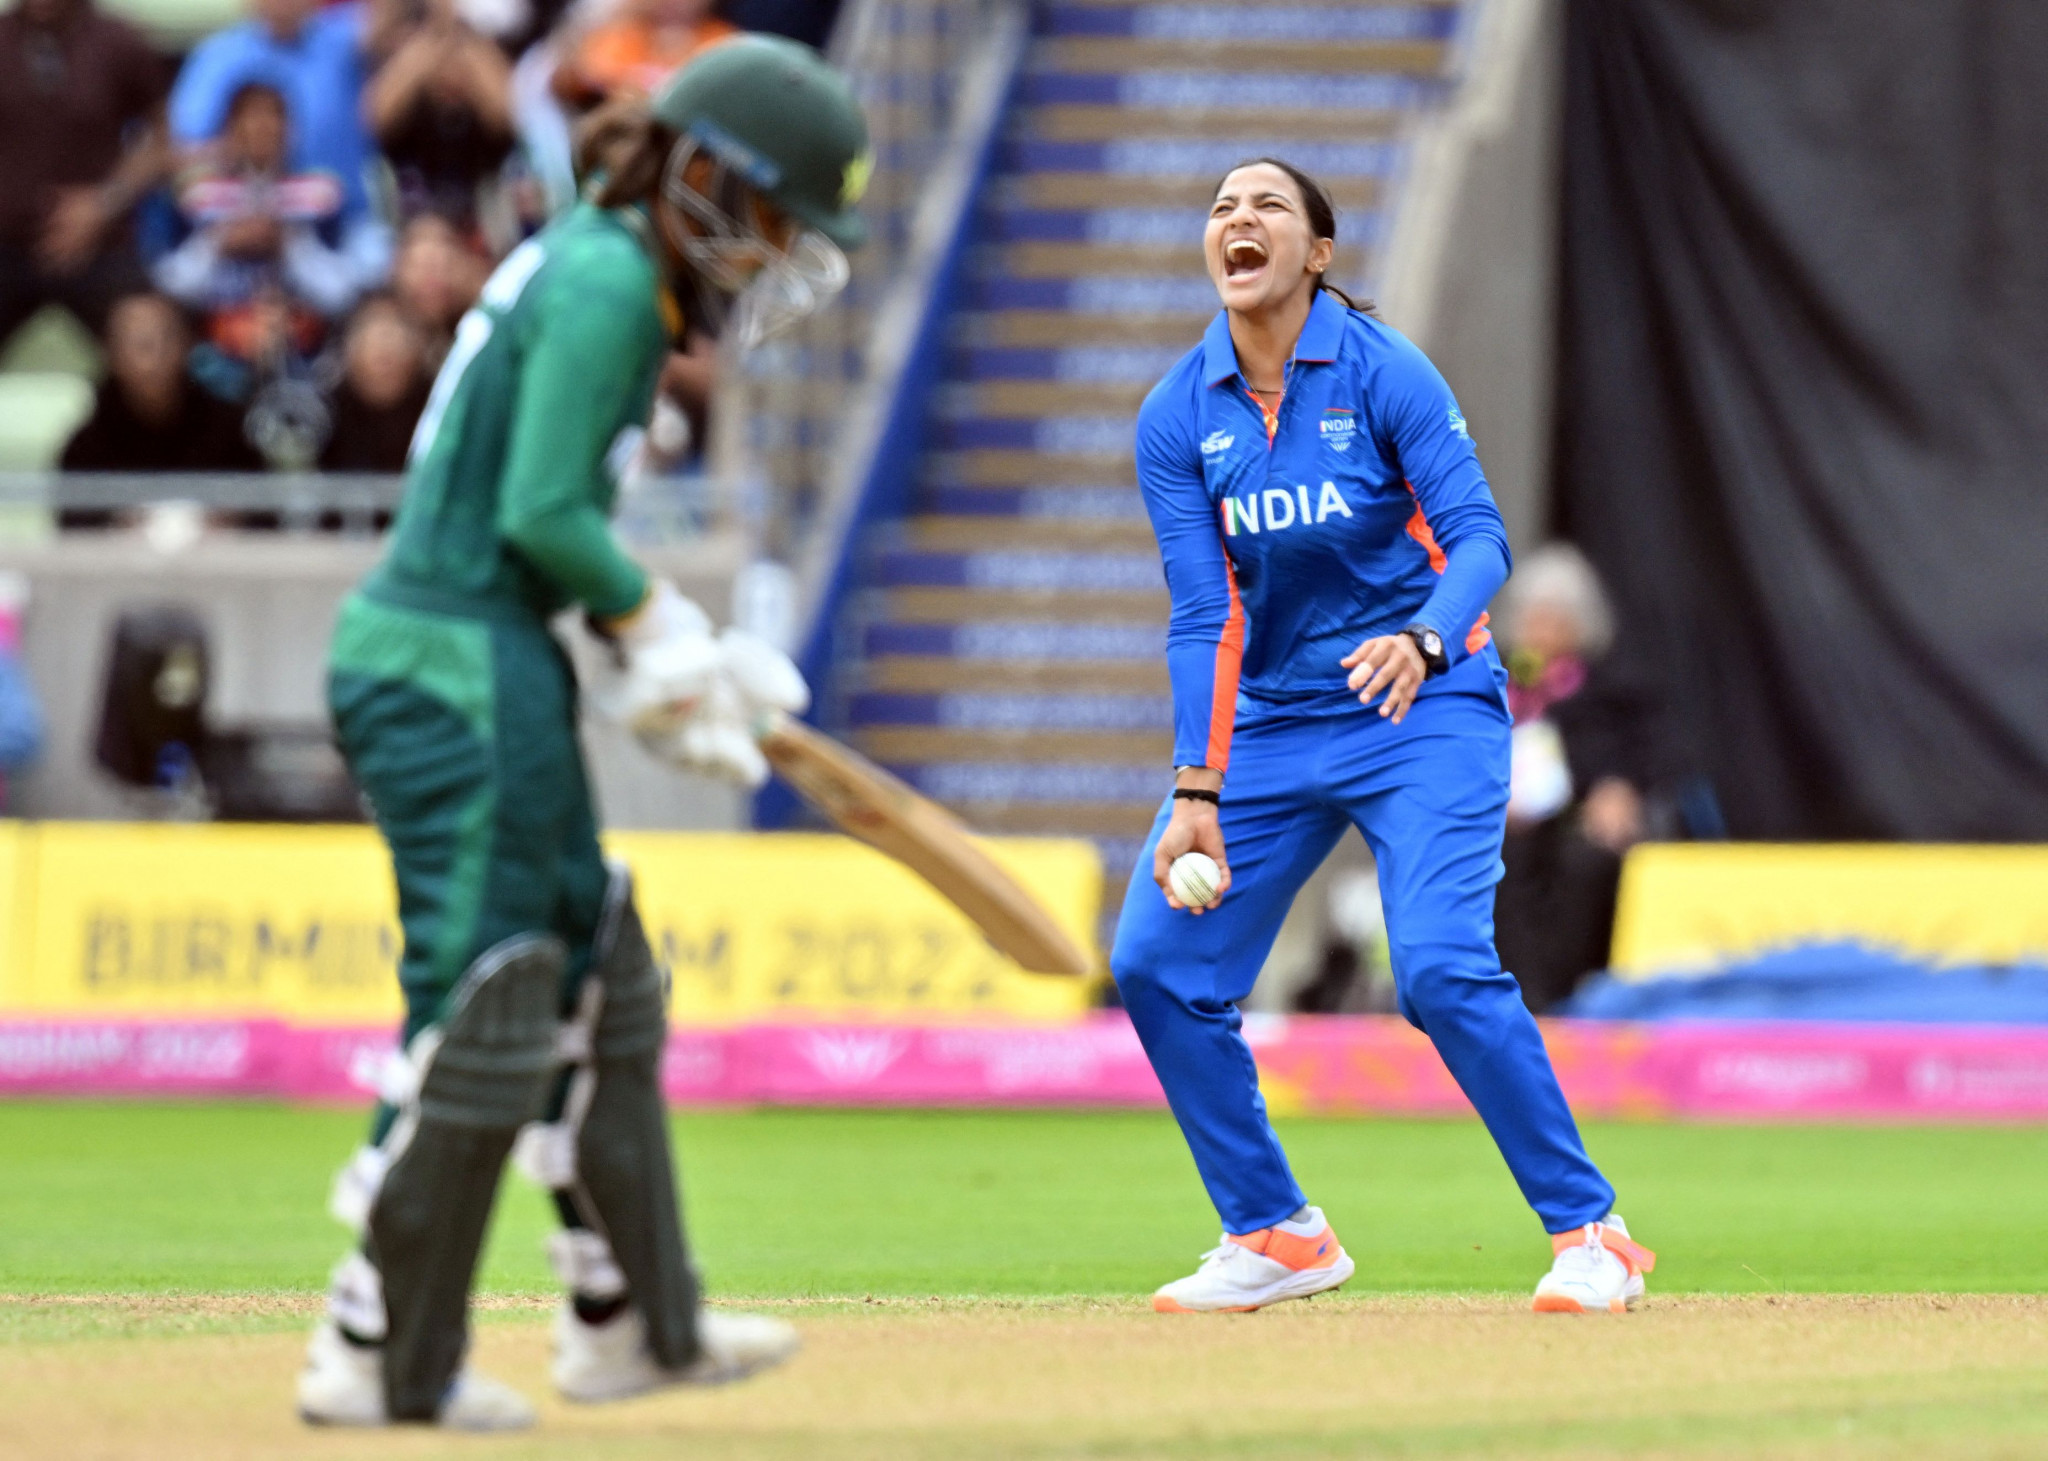 Rana calls for continued Indian support as Birmingham 2022 boasts of record-breaking ticket sales for women's T20 cricket